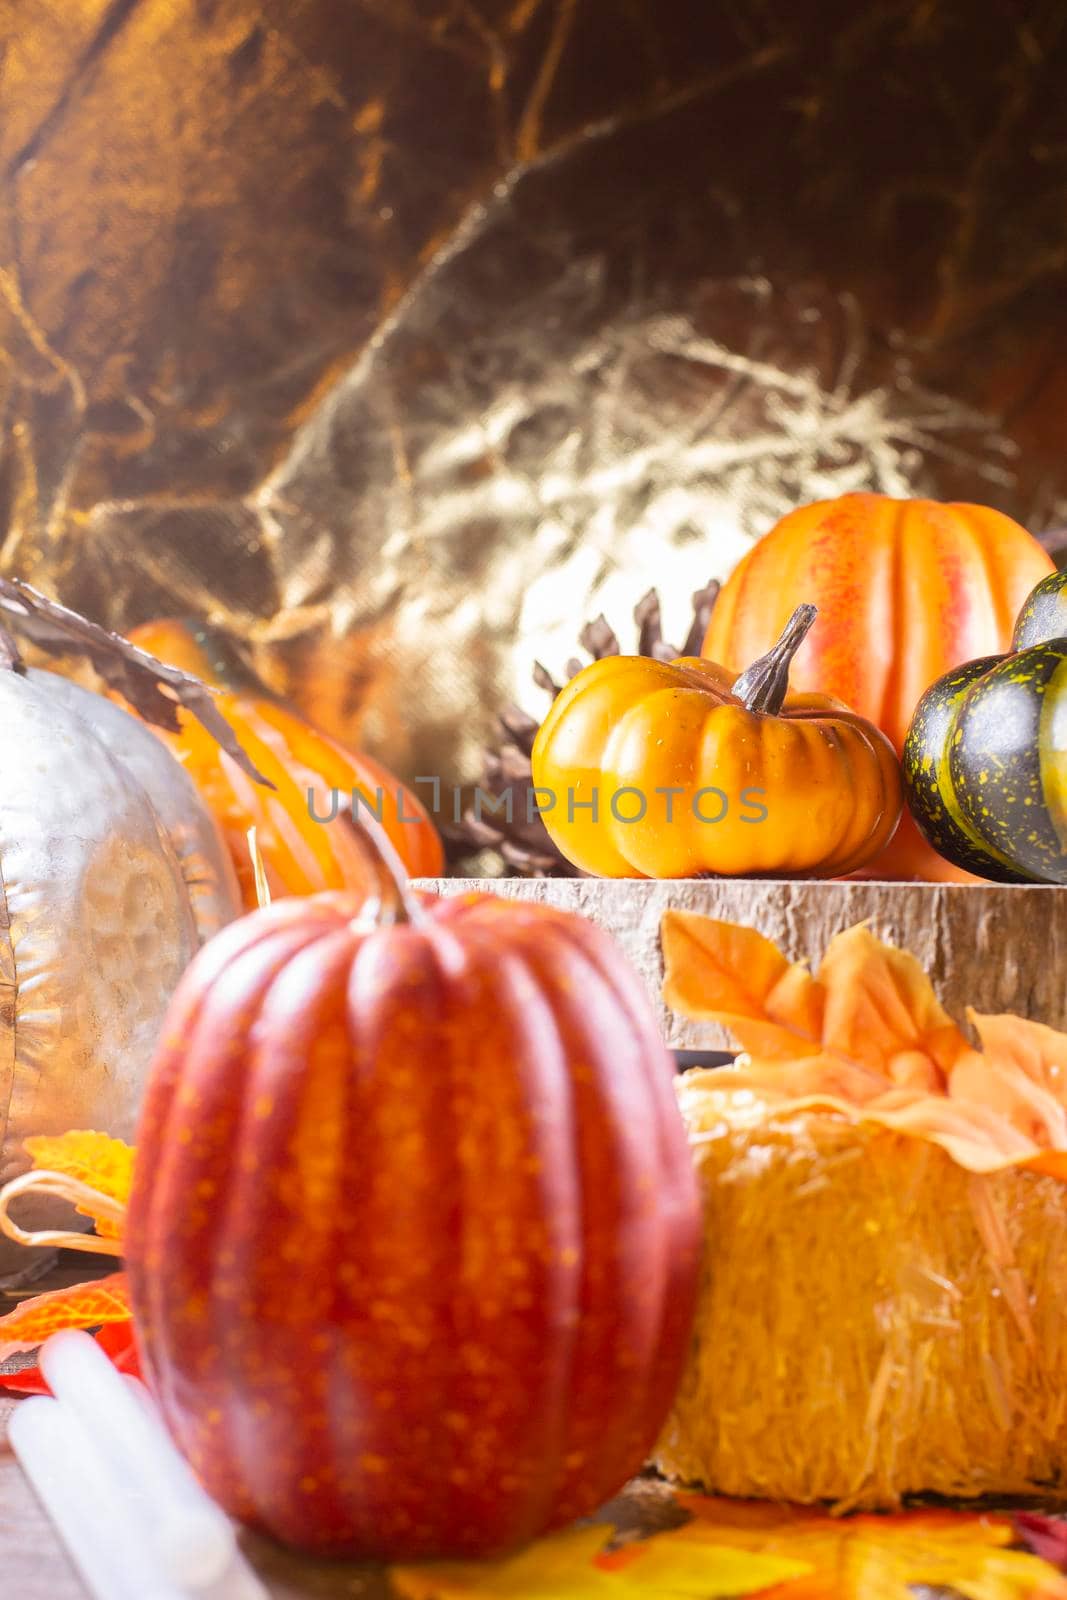 Small red pumpkin next to hay covered with leaves, orange pumpkins, orange squash, and a green squash on wood next to a silver pumpkin with a golden background